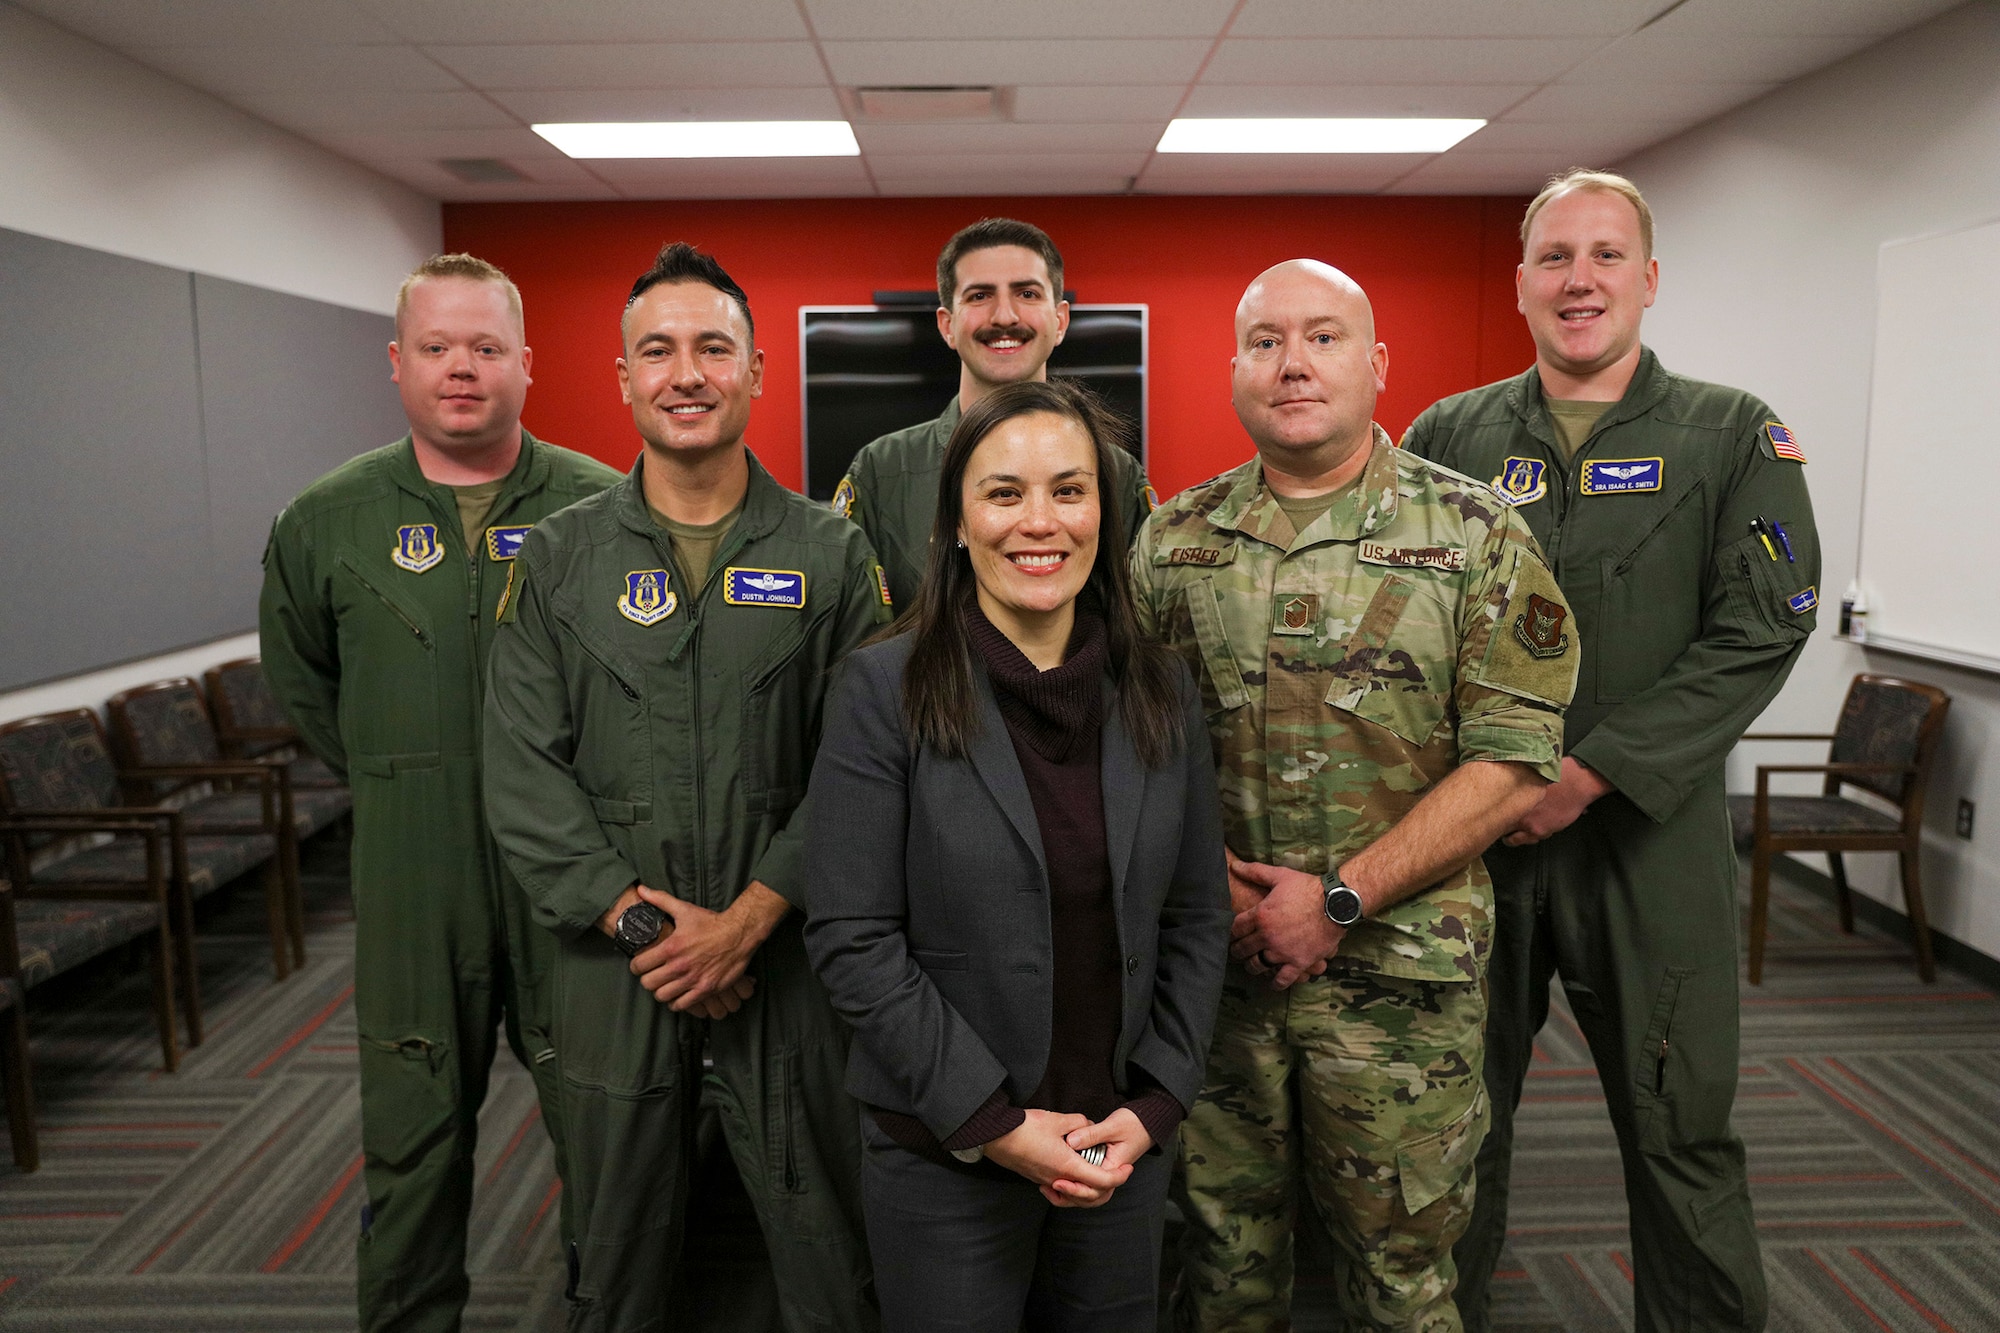 The Honorable Gina Ortiz Jones, Under Secretary of the Air Force, poses with the 445th Airlift Wing's 89th Airlift Squadron aircrew (left to right: Tech. Sgt. Zachary Webb, Lt. Col. Dustin Johnson, 1st Lt. Logan Sisca, Master Sgt. Spencer Fischer (assigned to the 445th Aircraft Maintenance Squadron) and Senior Airman Isaac Smith) Jan. 9 as part of her visit to Wright-Patterson Air Force Base, Ohio. The Airmen were part of the aircrew of Reach 828 and delivered the first Afghan baby, Reach, onboard a 445th AW C-17 Globemaster III during the evacuation in August 2021.